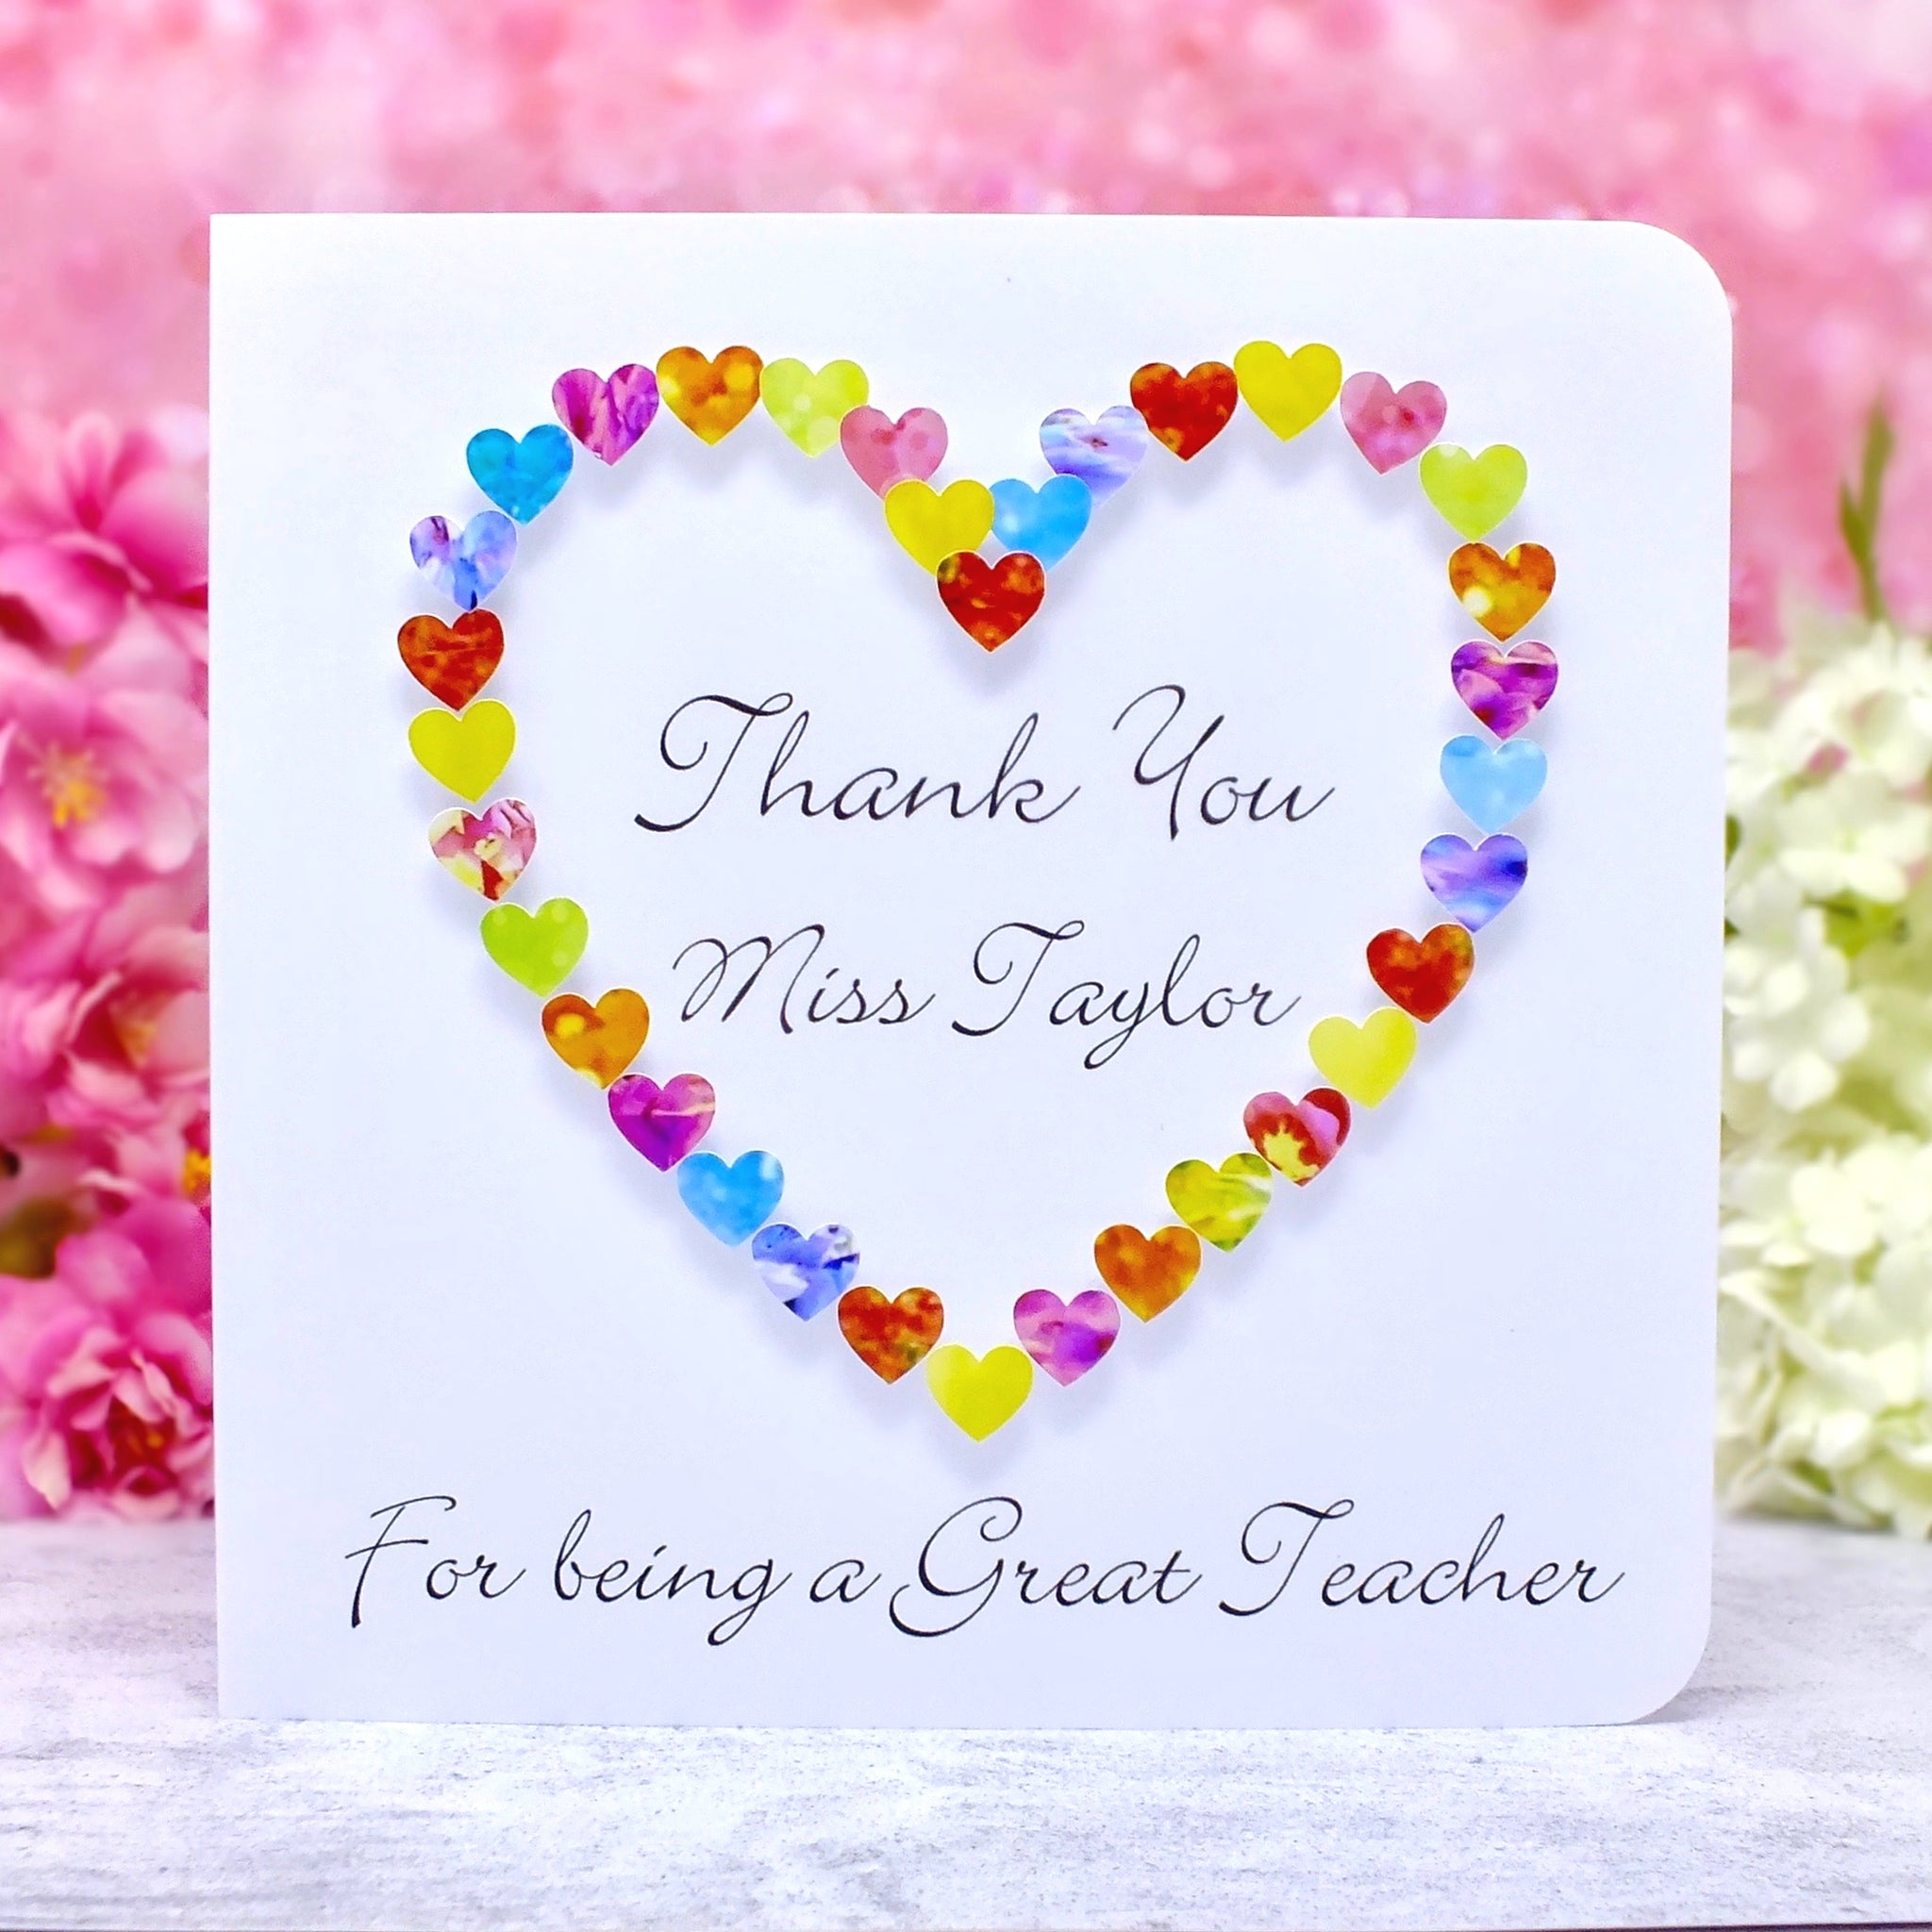 Thank You Teacher Card - Hearts, Personalised Main